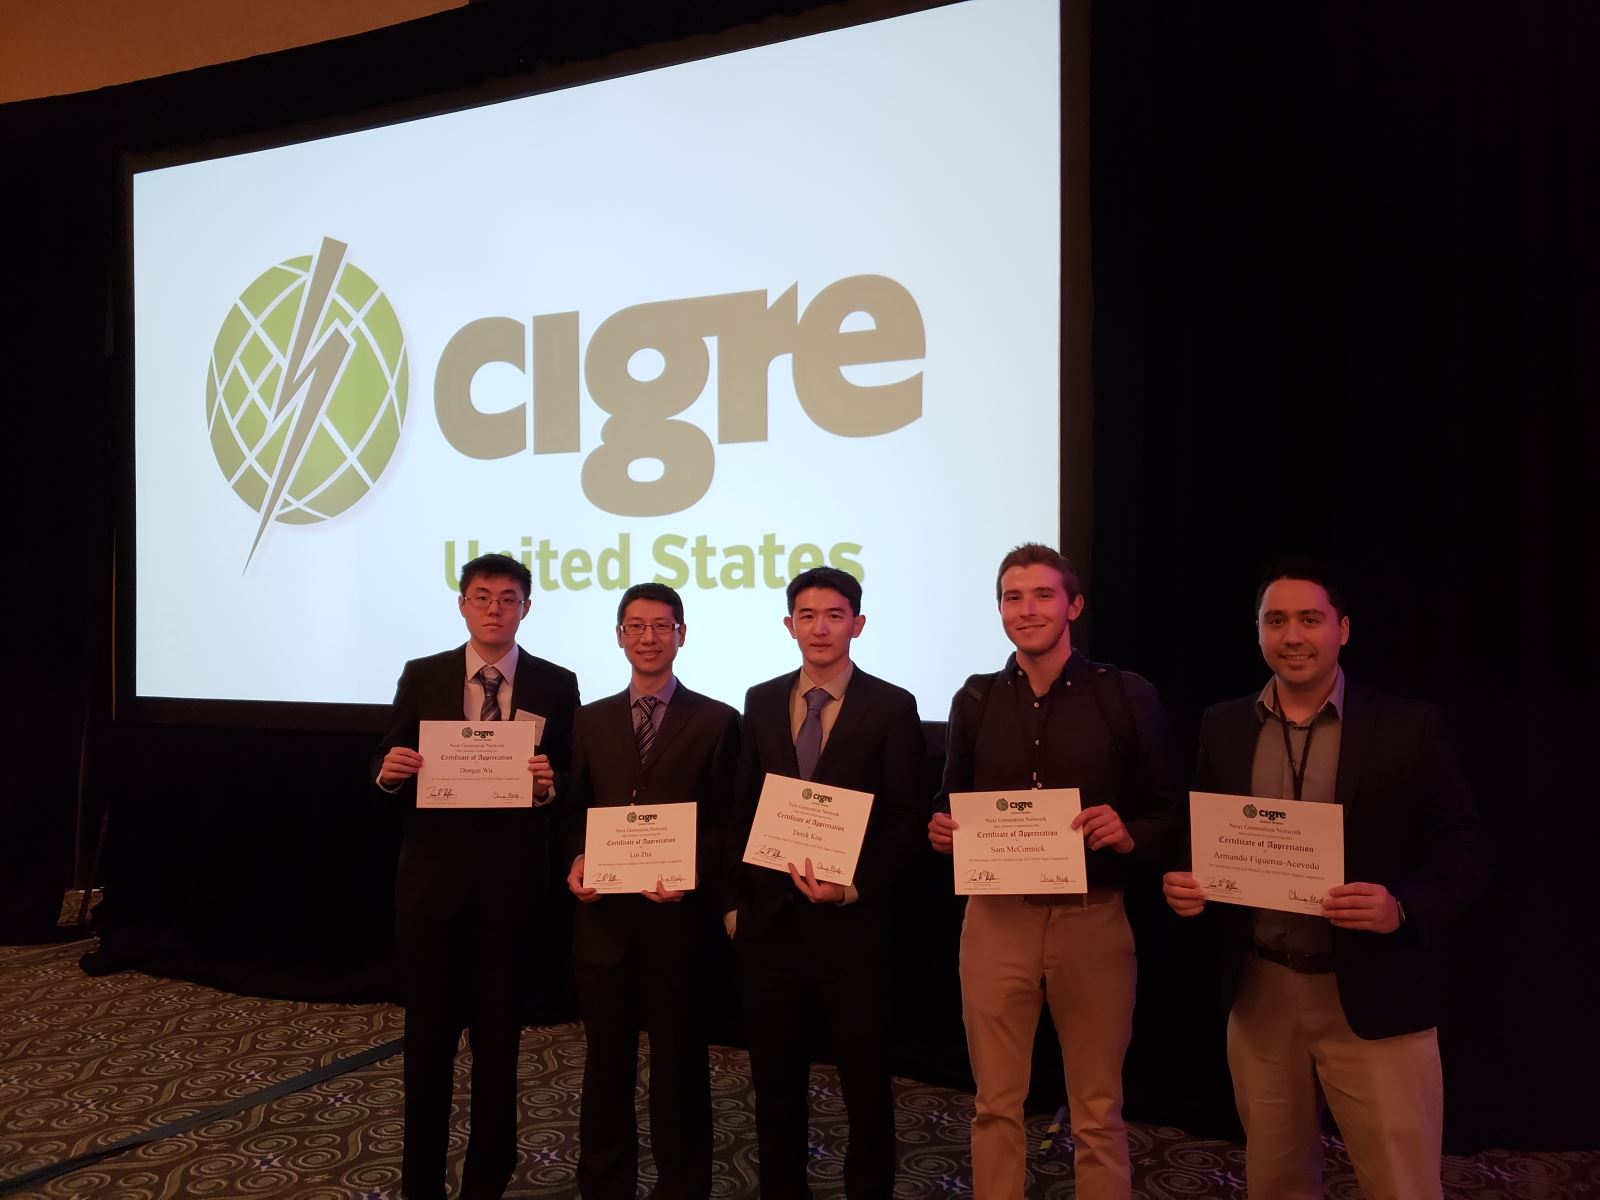 CIGRE United States Next Generation Network - 5th Annual Paper Competition Provides Younger Members a Platform